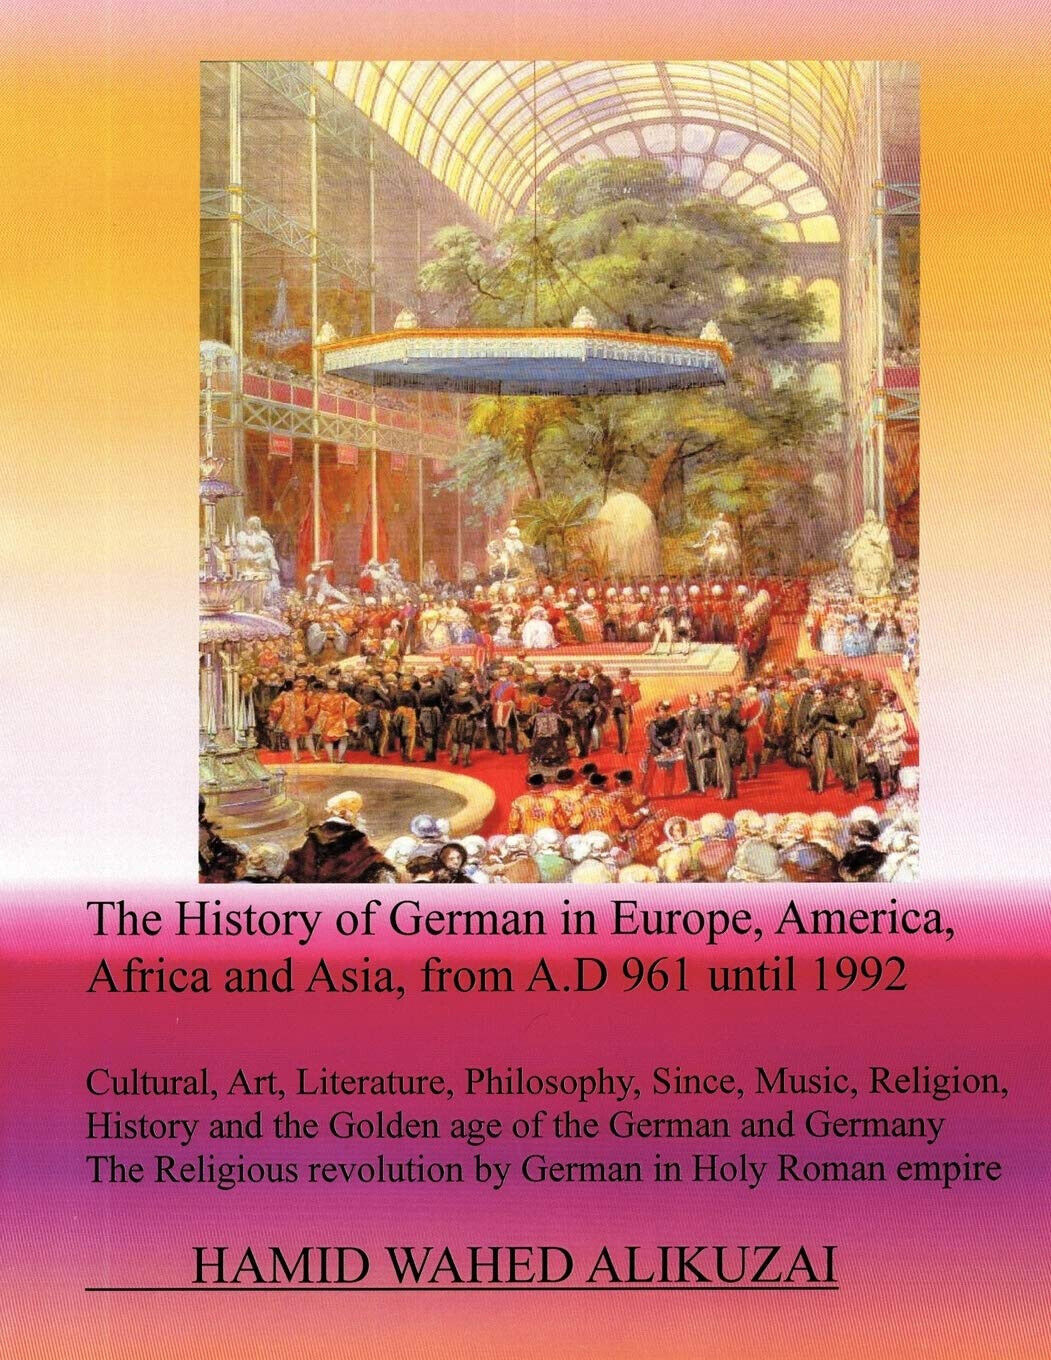 The History of German in Europe, America, Africa and Asia, from A.D 961 until